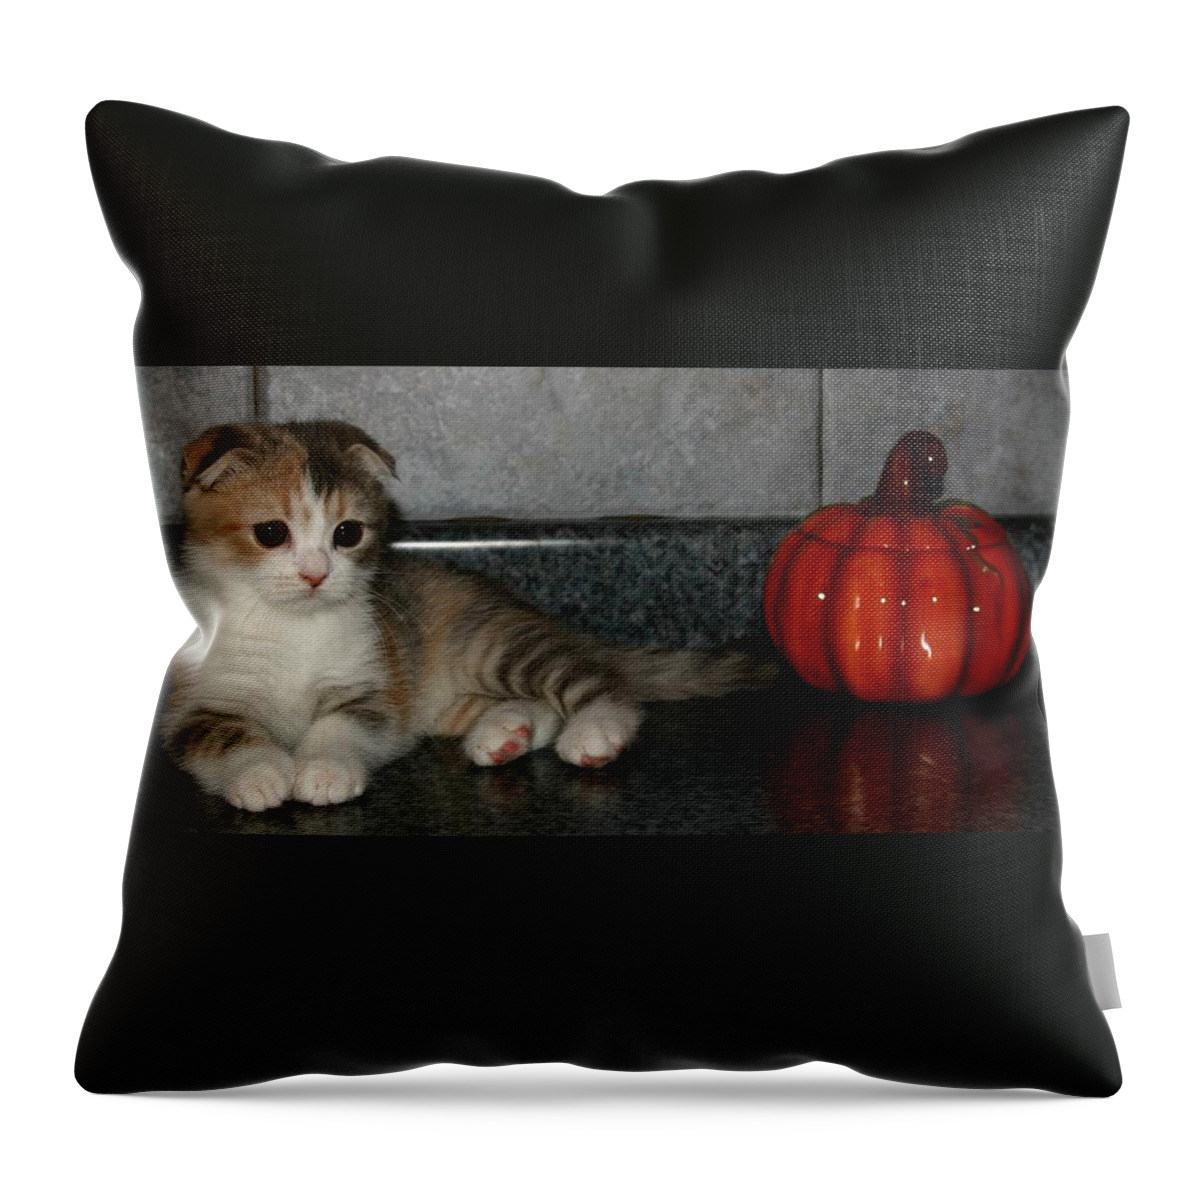 Scottish Folds Throw Pillow featuring the pyrography October 2005 by Robert Morin